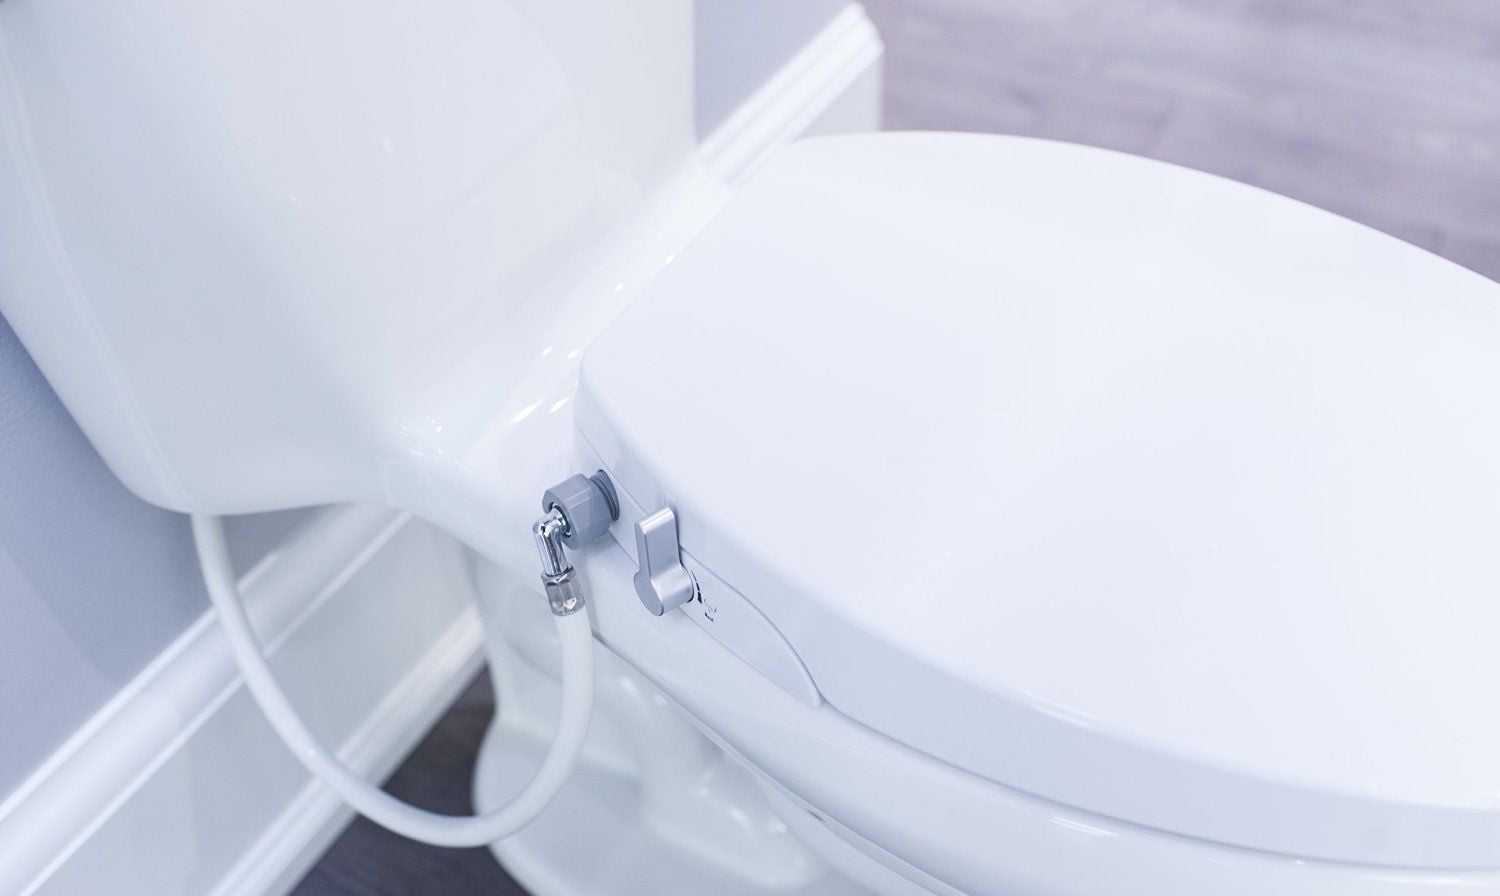 Non Electric Bidet Toilet Seats With Cover Elongated Style Clean Simple Install 